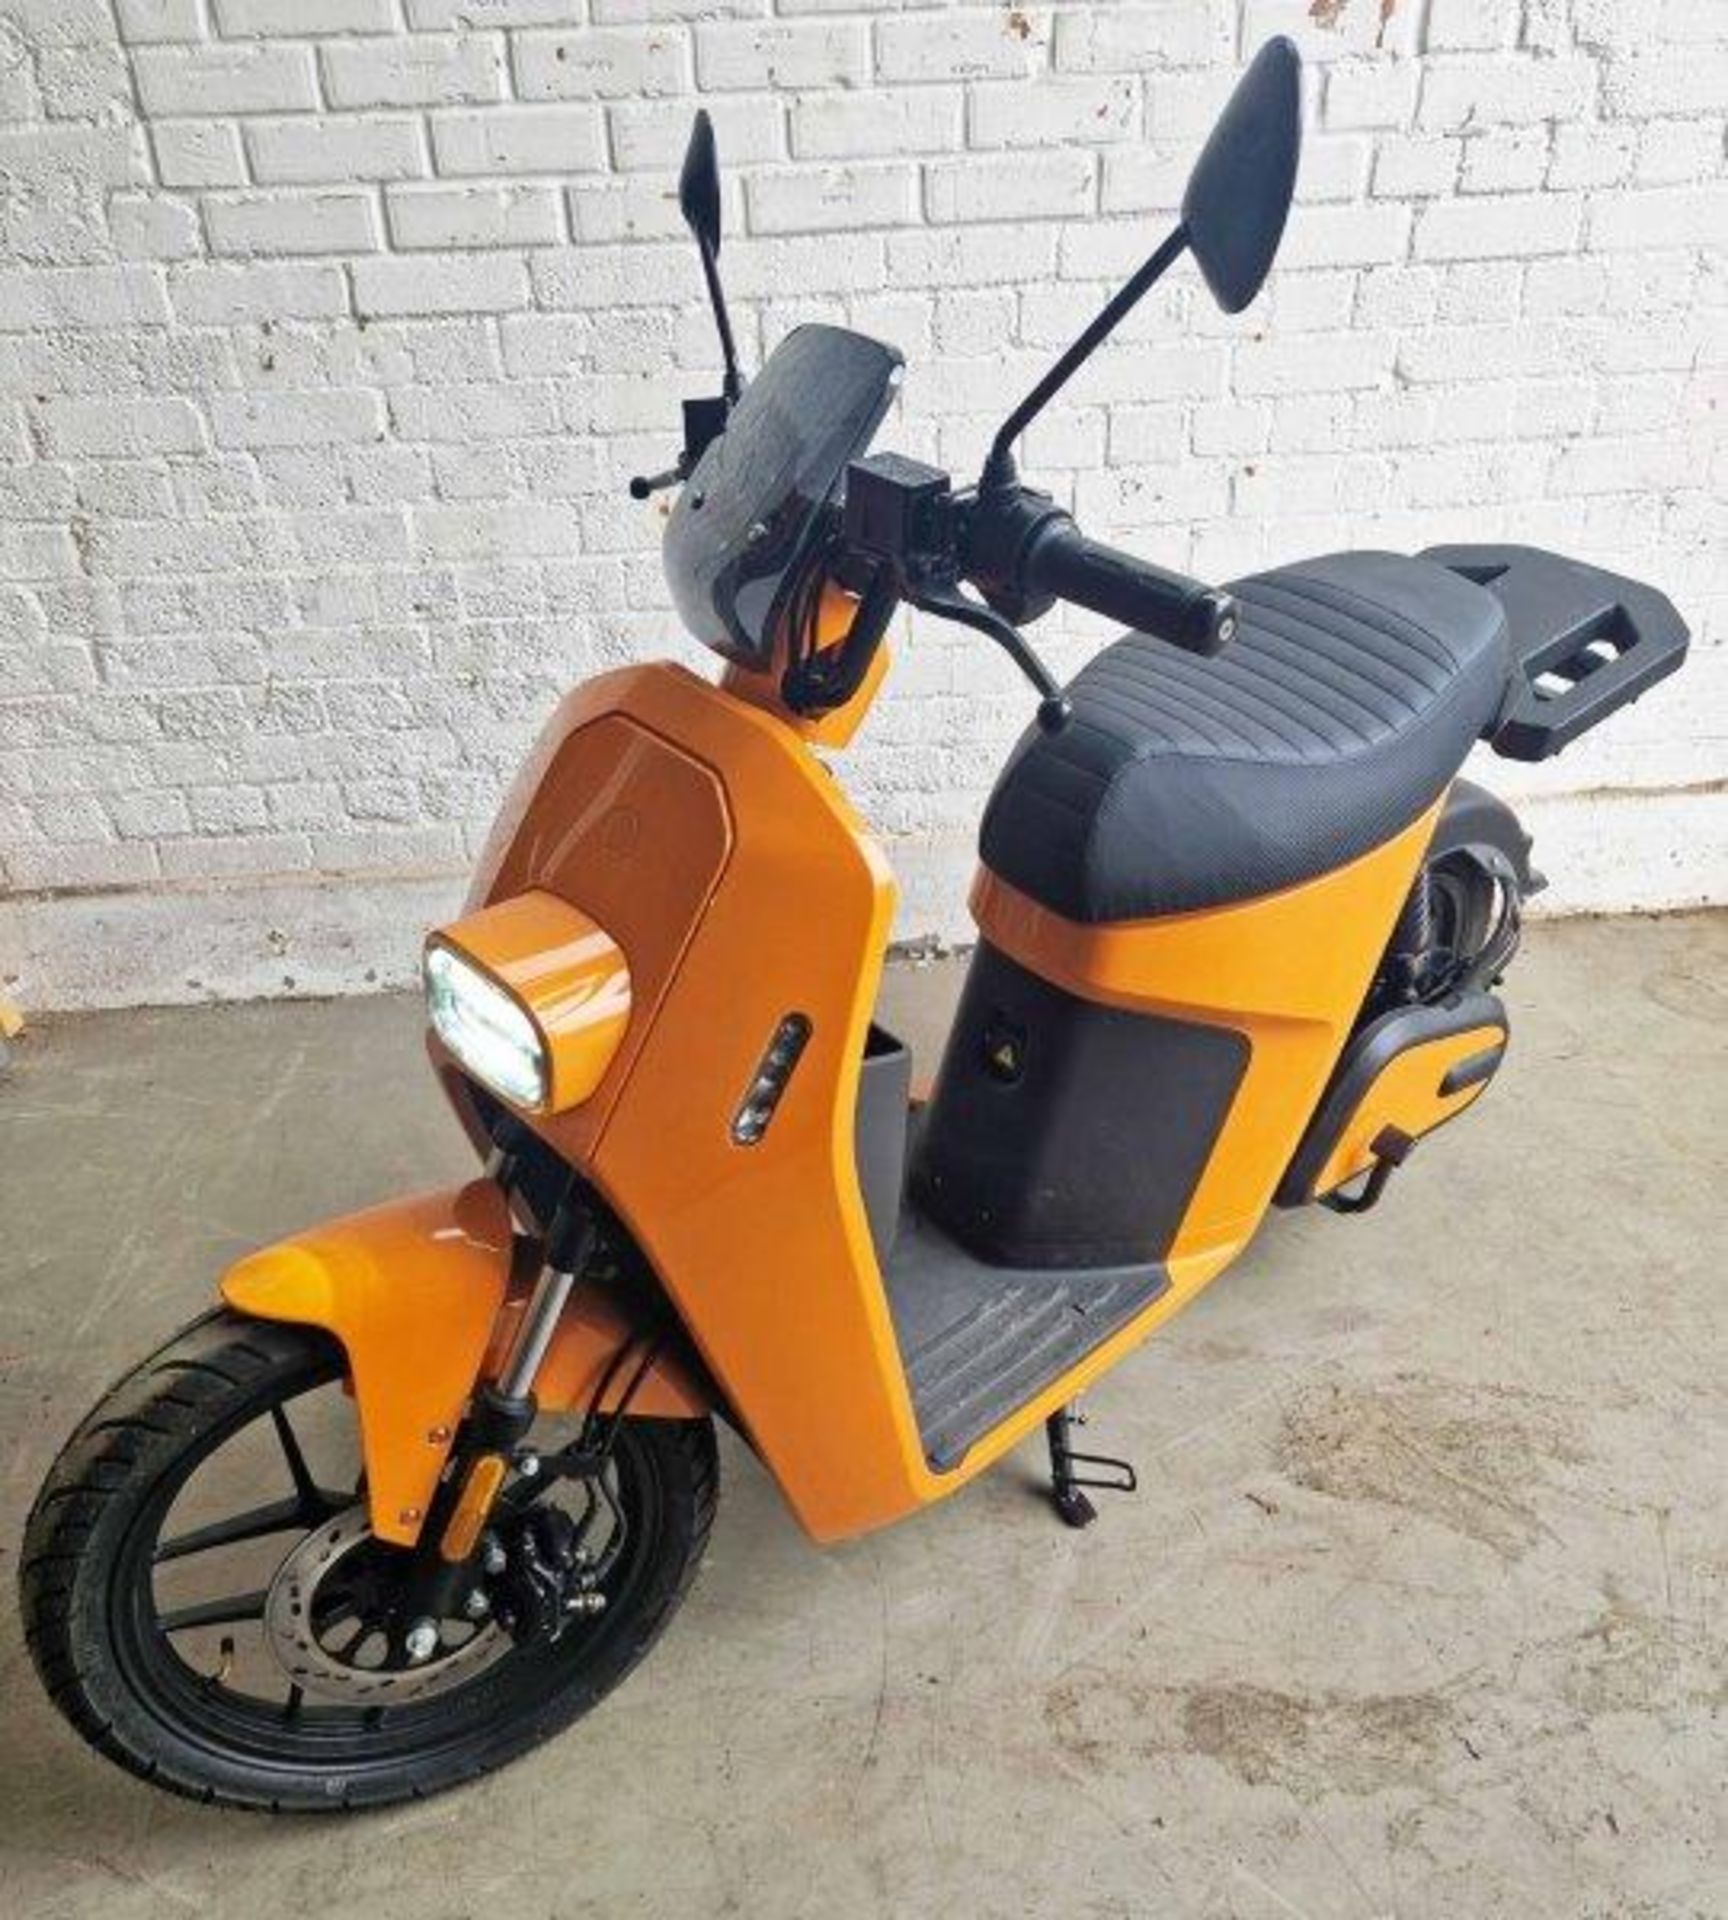 VMOTO VS2 L1e-b Electric Moped in Orange. Boxed, Unused and Unregistered, requiring some assembly, - Image 2 of 11